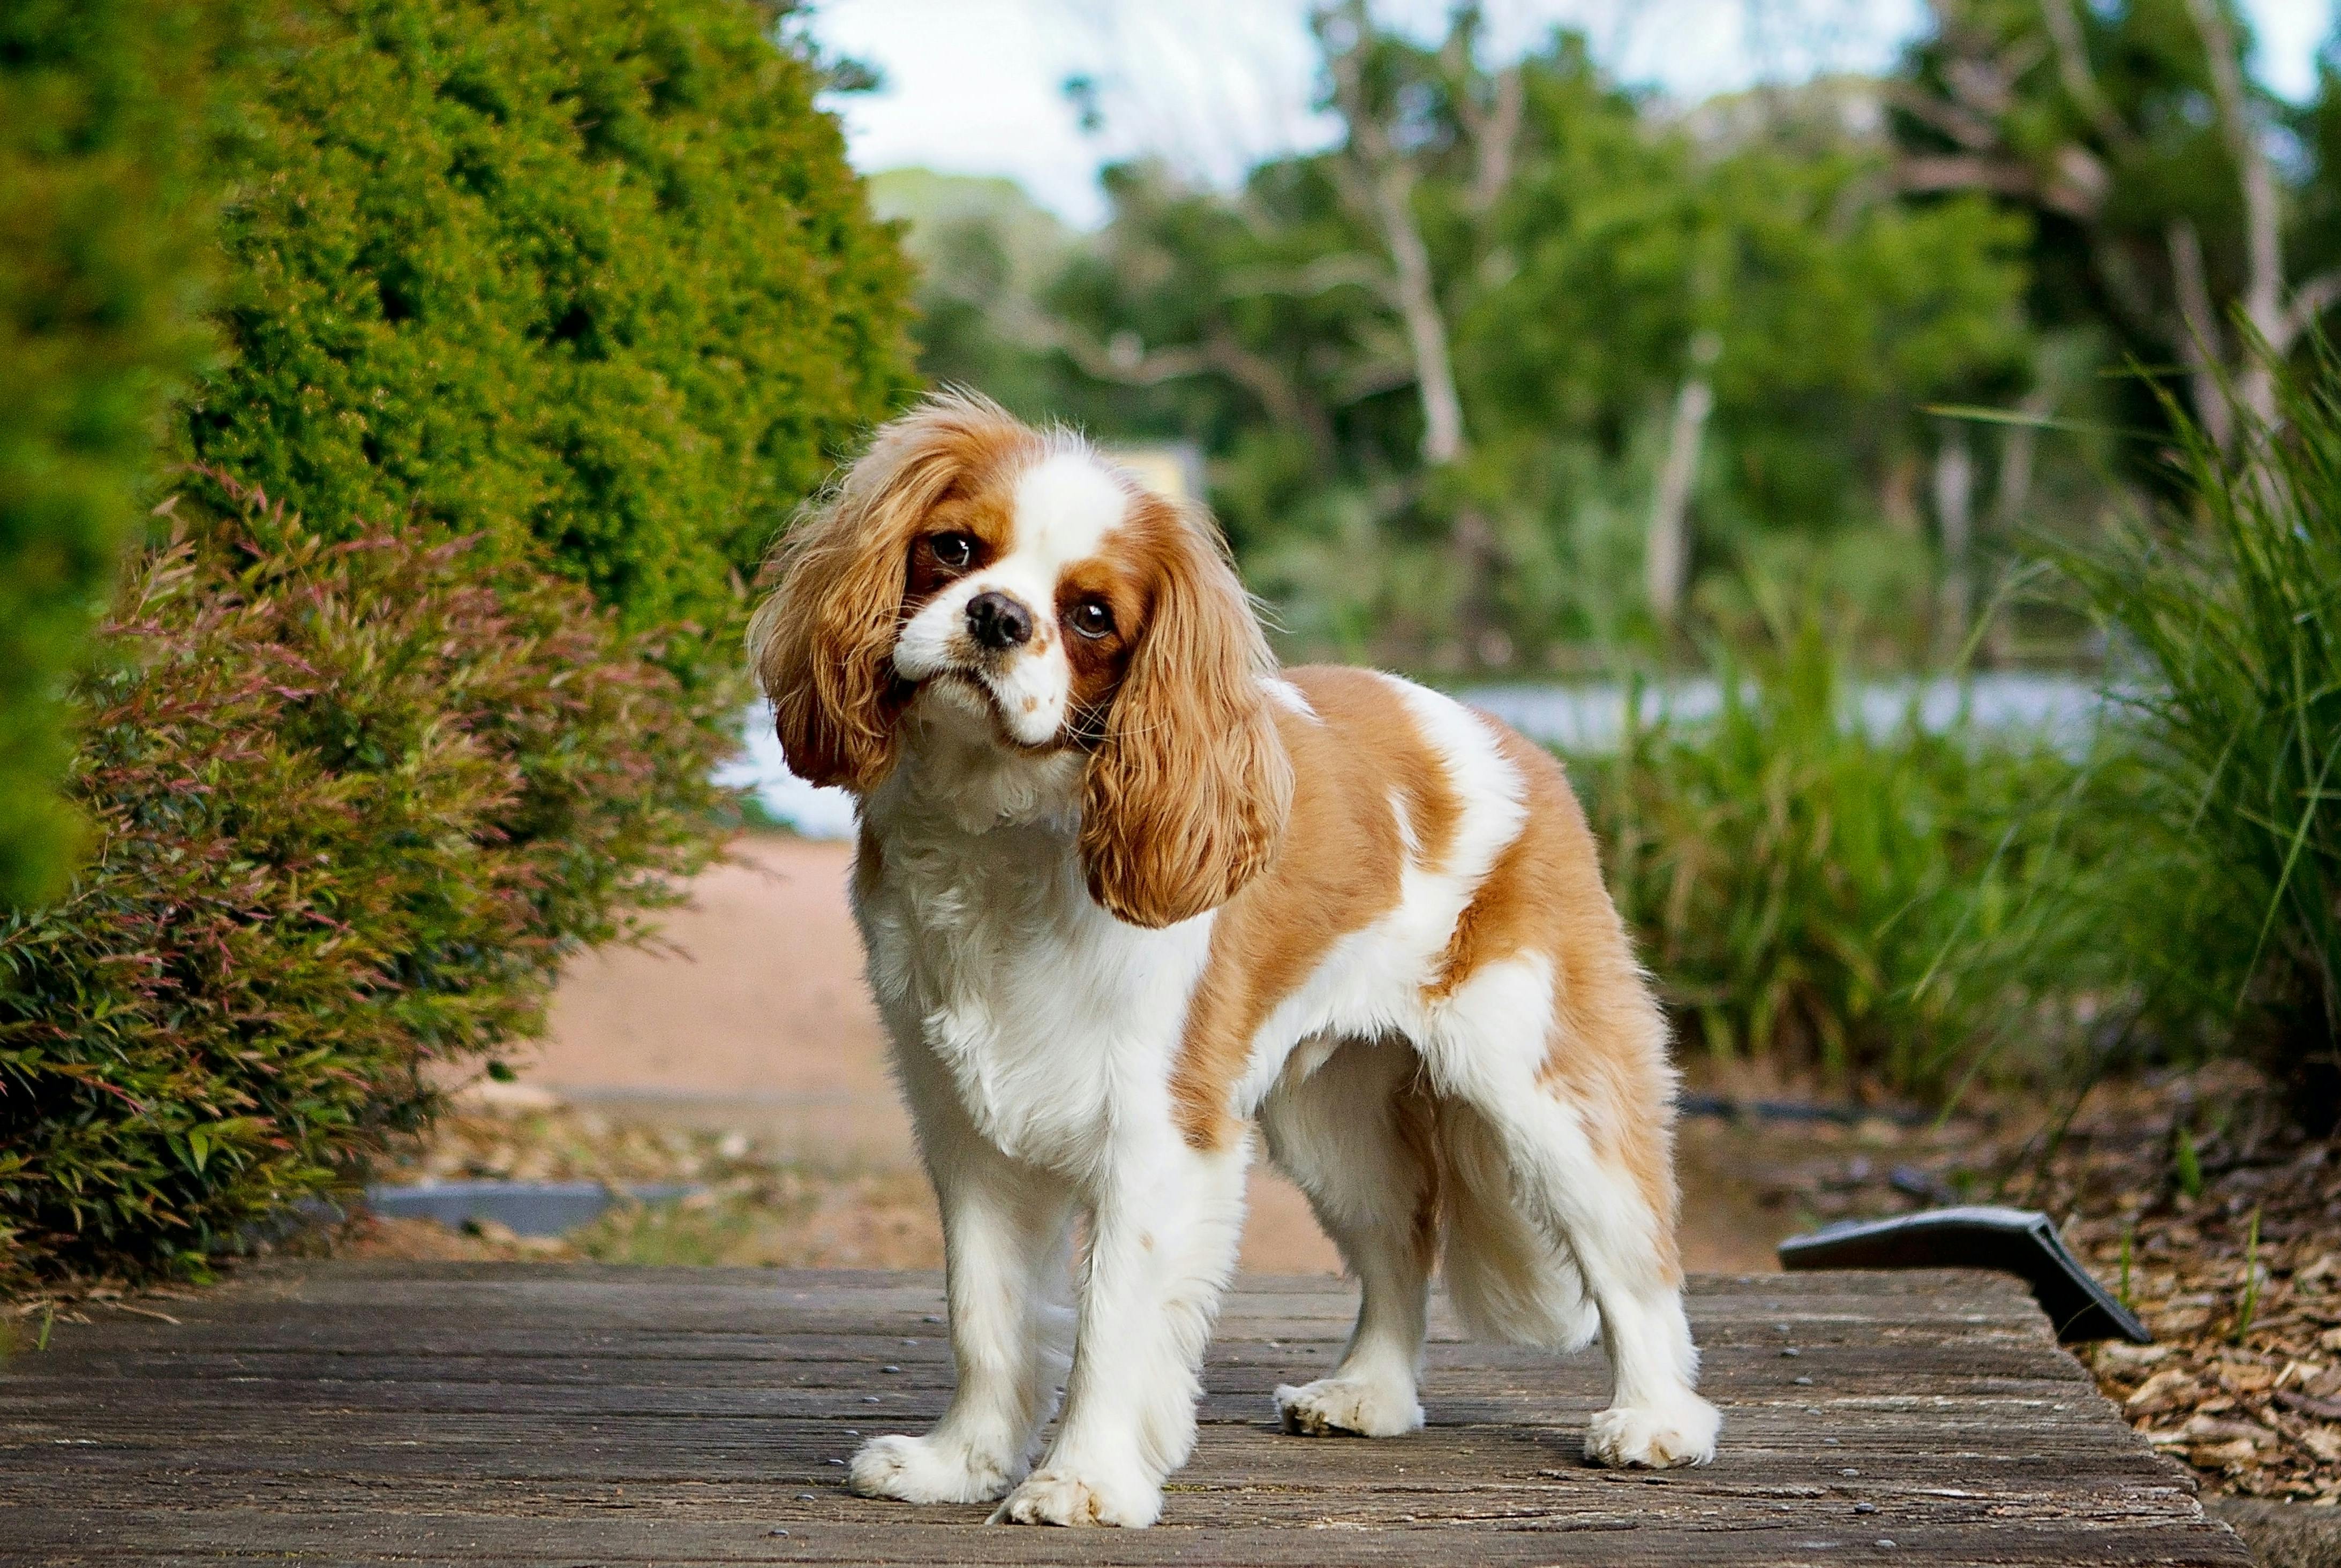 Cavalier King Charles Spaniel standing outside on a path.